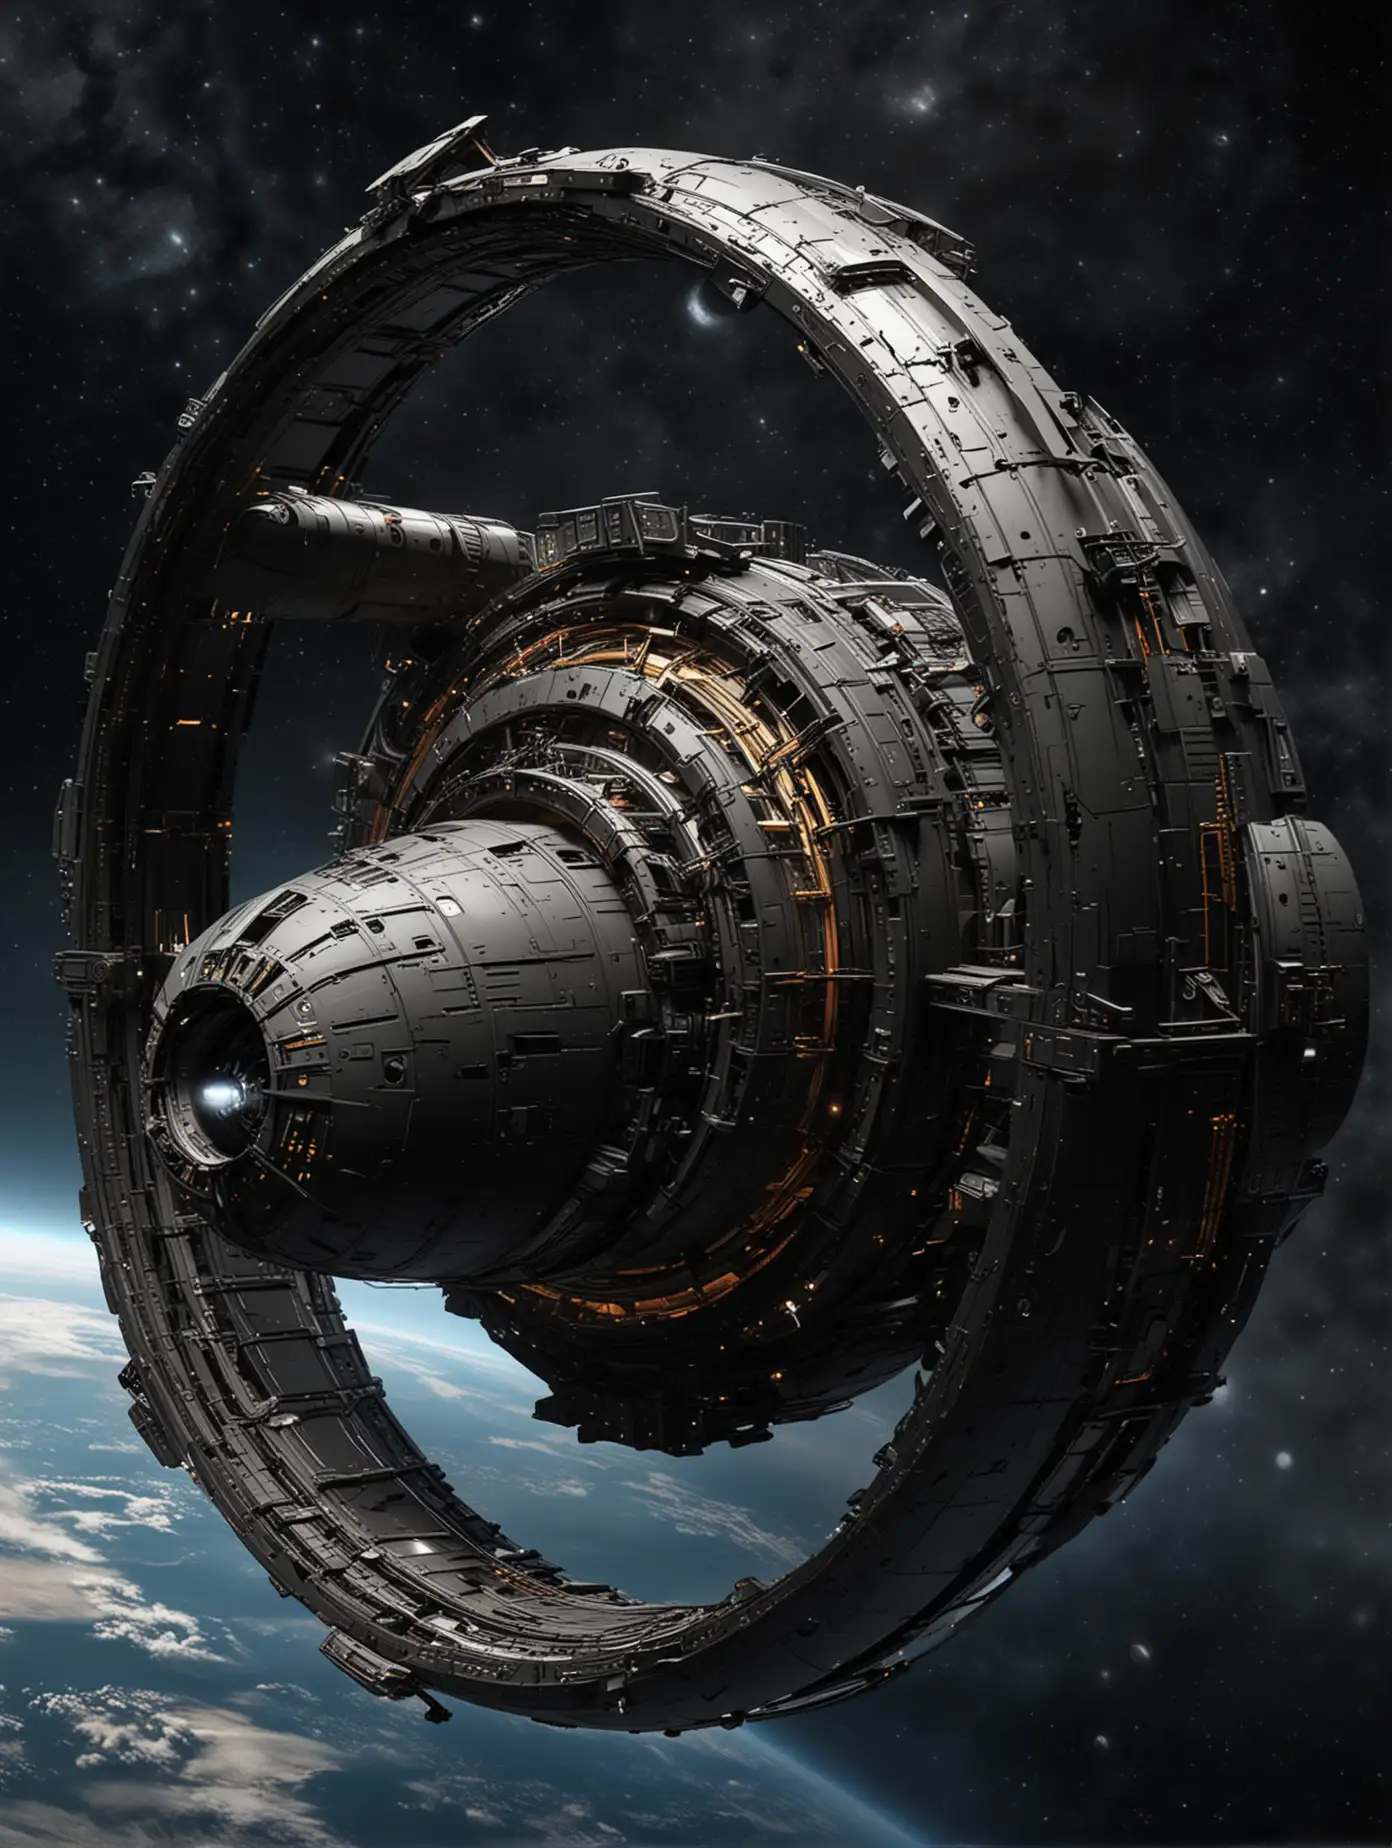 Sleek Black Spaceship with Rotating Ring and Wormhole in Dark Space